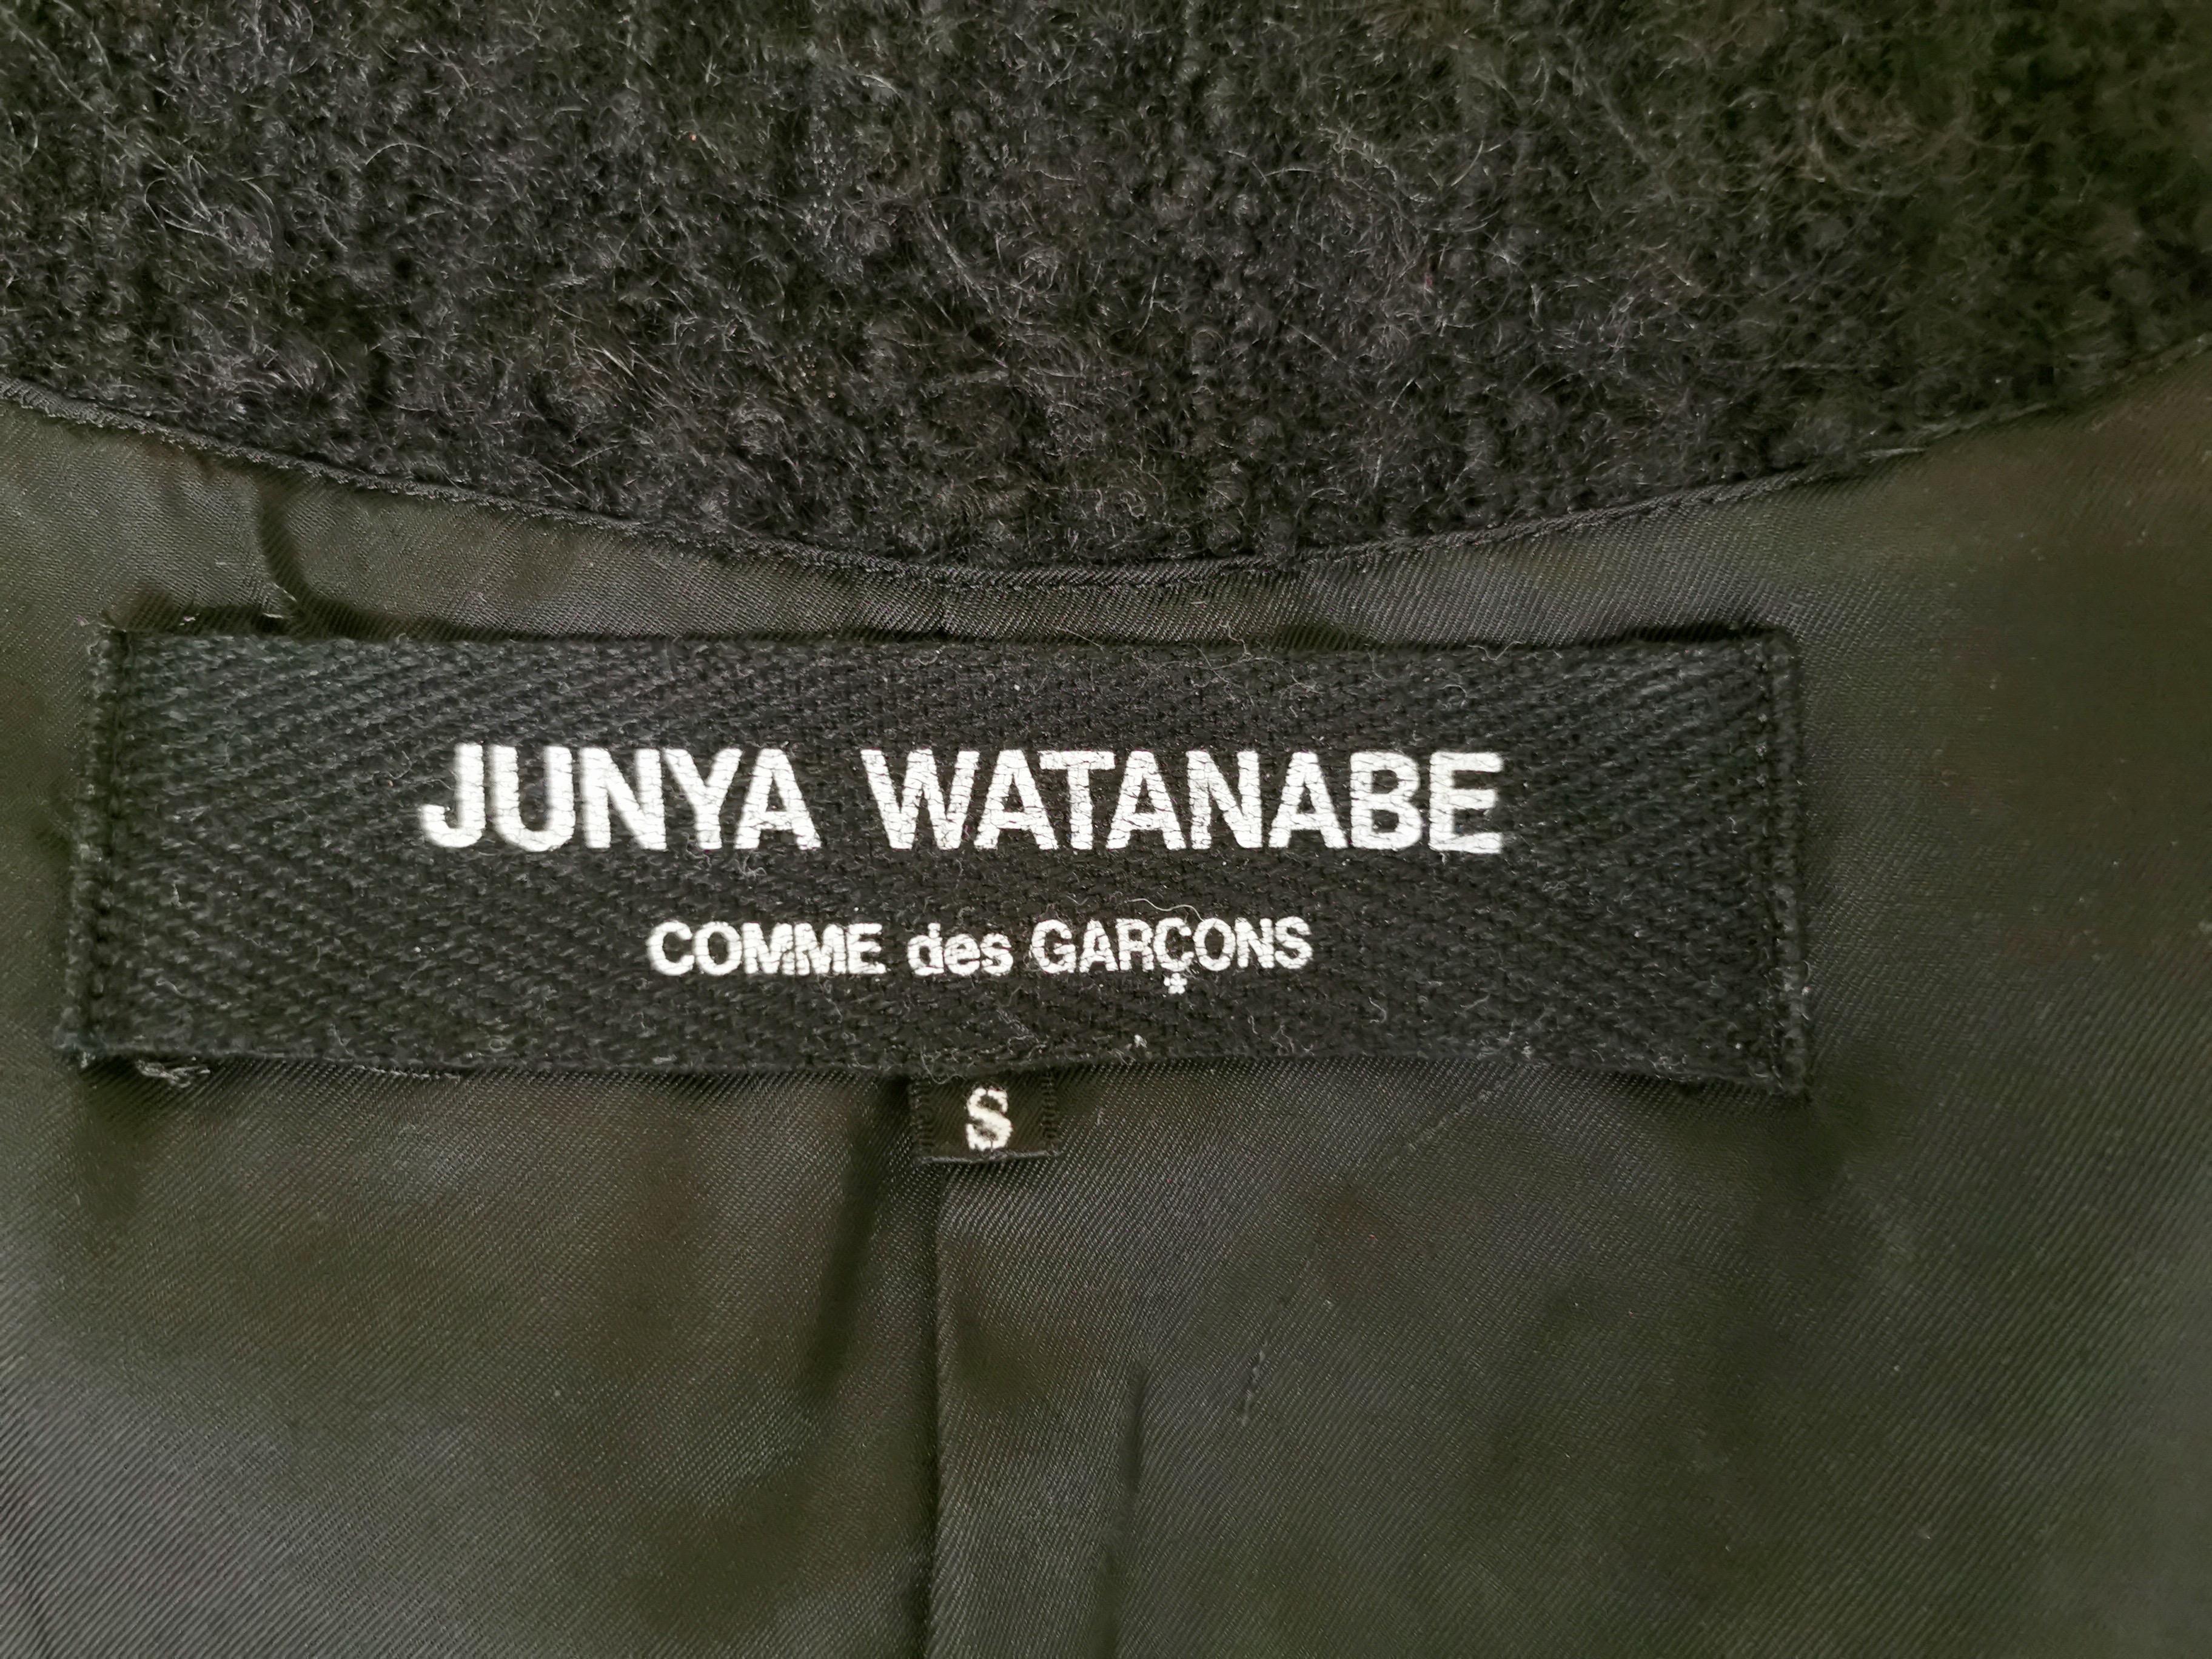 Comme des Garcons Junya Watanabe Cropped Chanel Style Fringed Jacket AD 2003 9